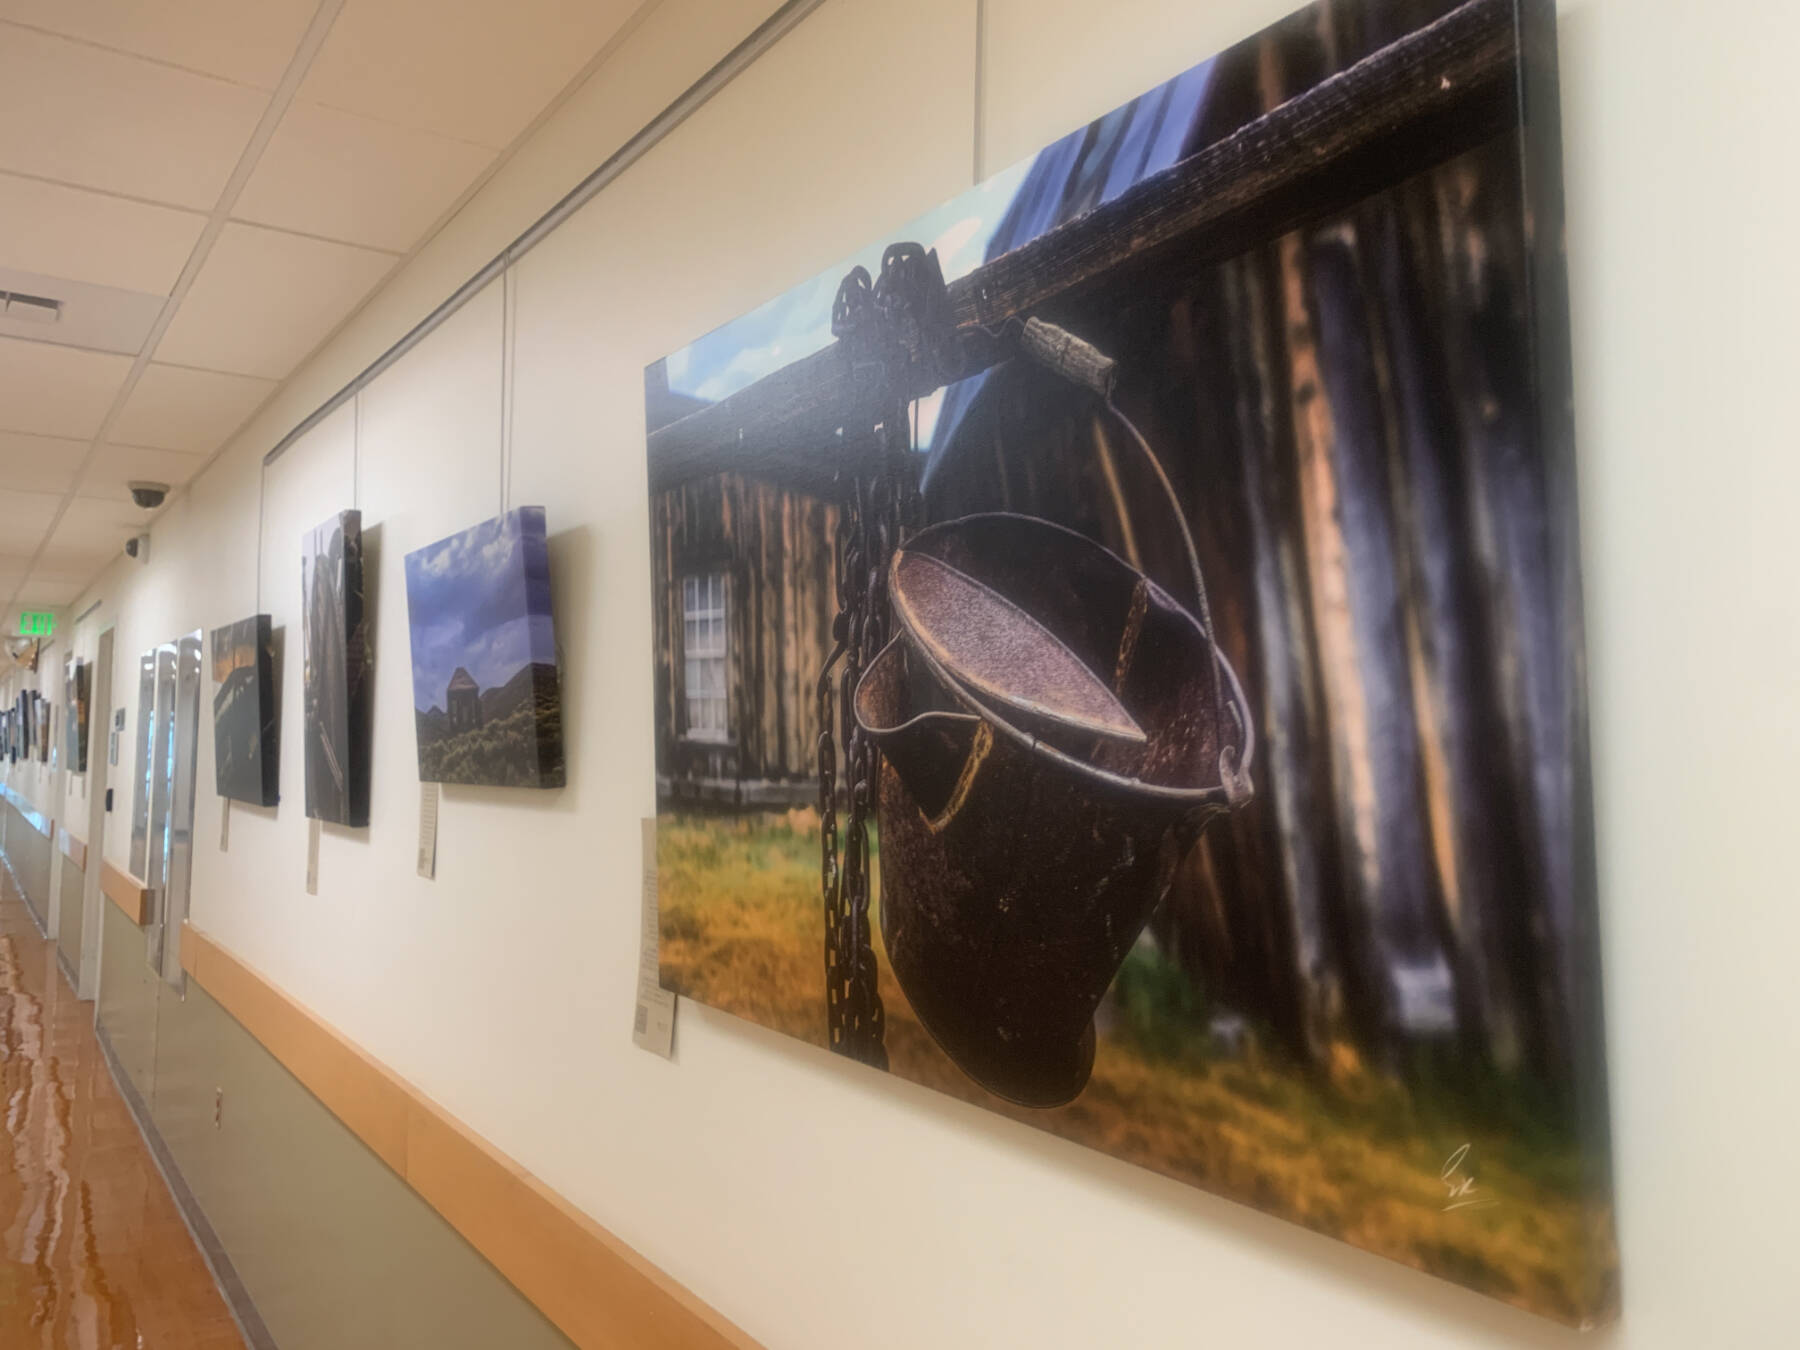 “Joy in the Journey,” an exhibit of photographs by Dr. Edson Knapp is on display in South Peninsula Hospital’s gallery through July 4, 2023. Photo by Christina Whiting